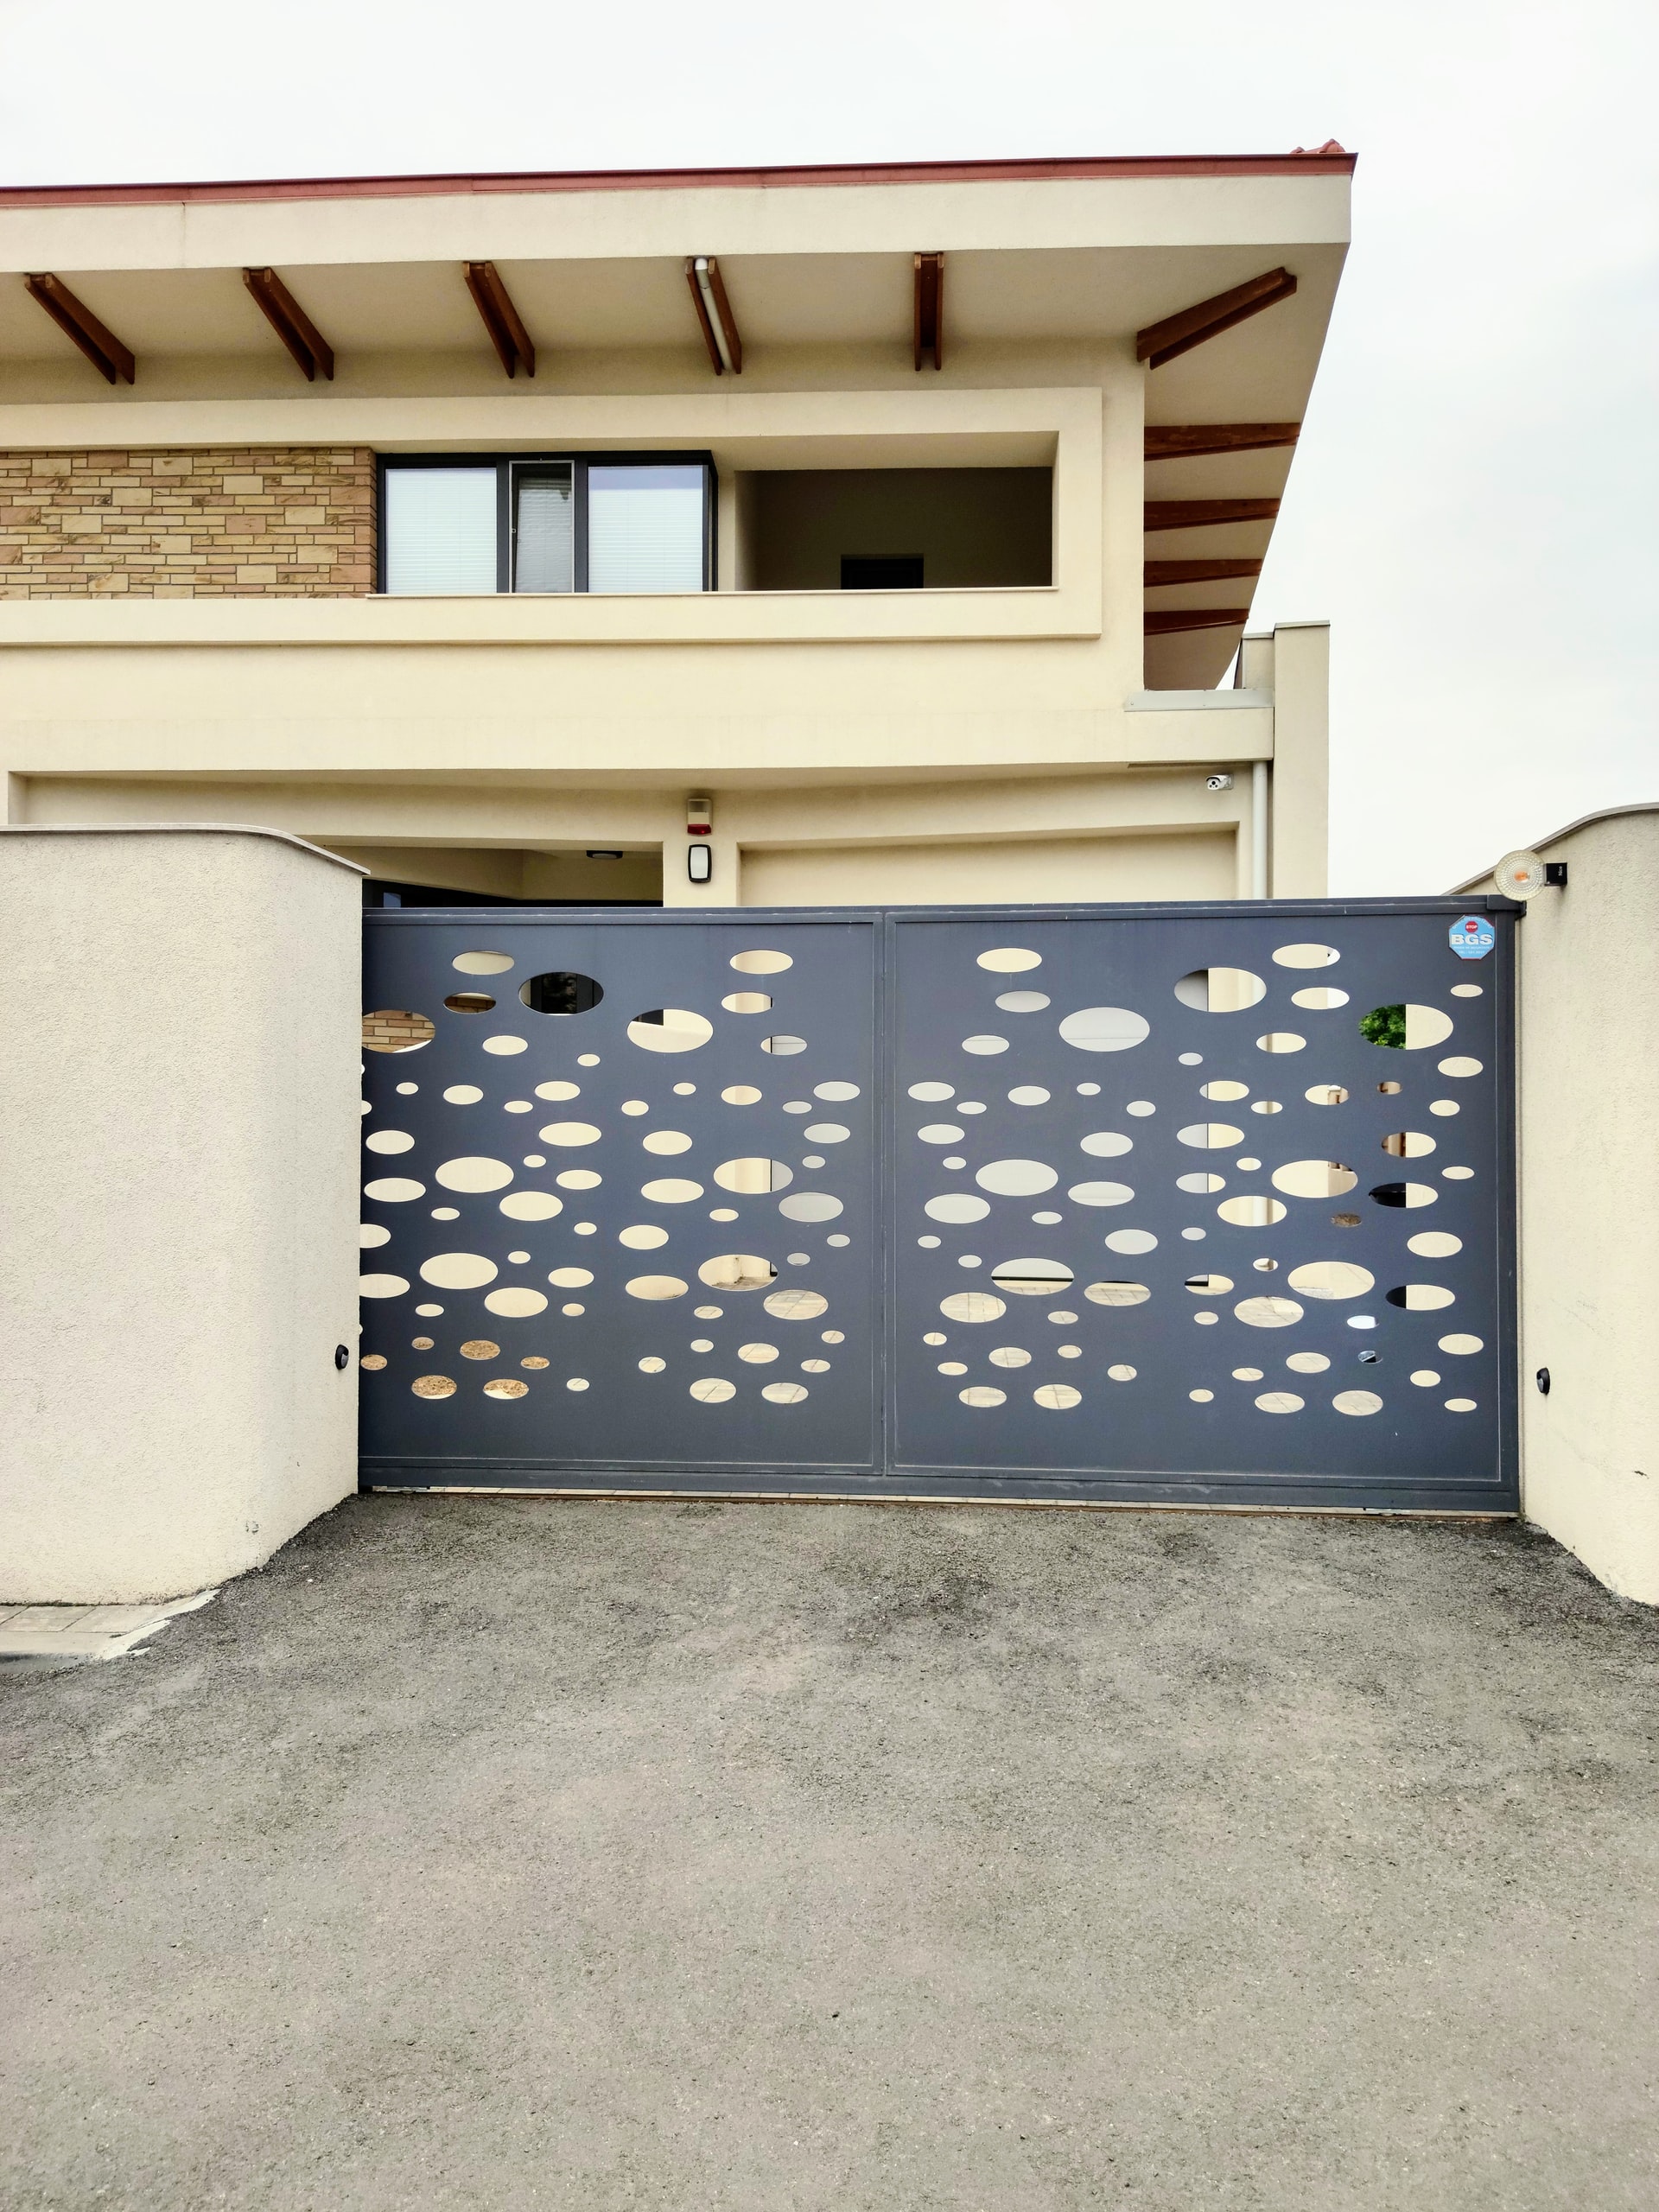 Swing Gates vs Sliding Gates: Which Is Better For My Home?